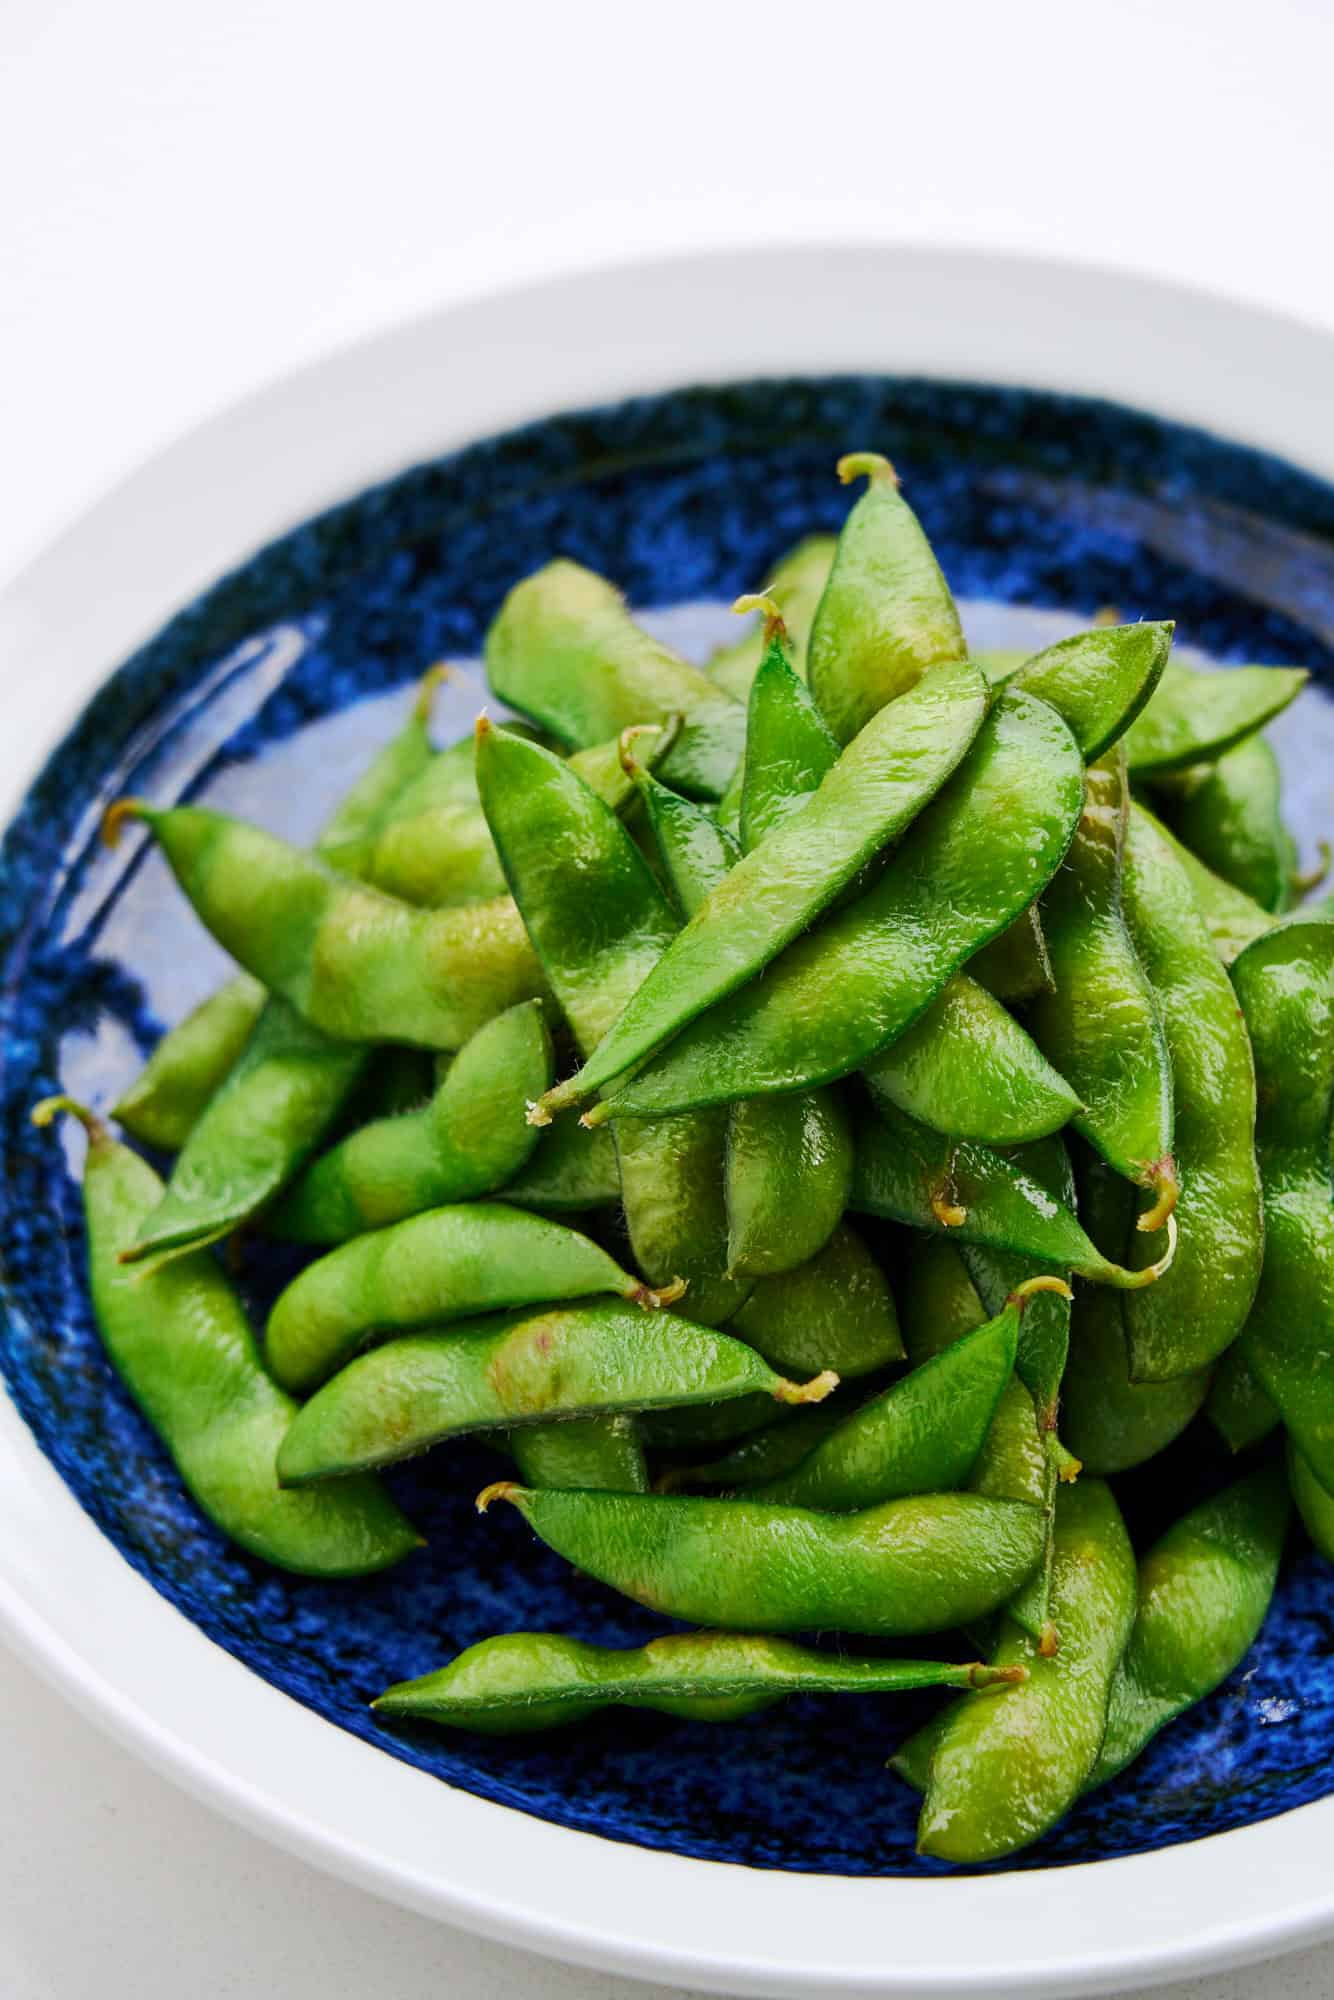 Steaming edamame with sake preserves it's flavor while infusing it with umami.